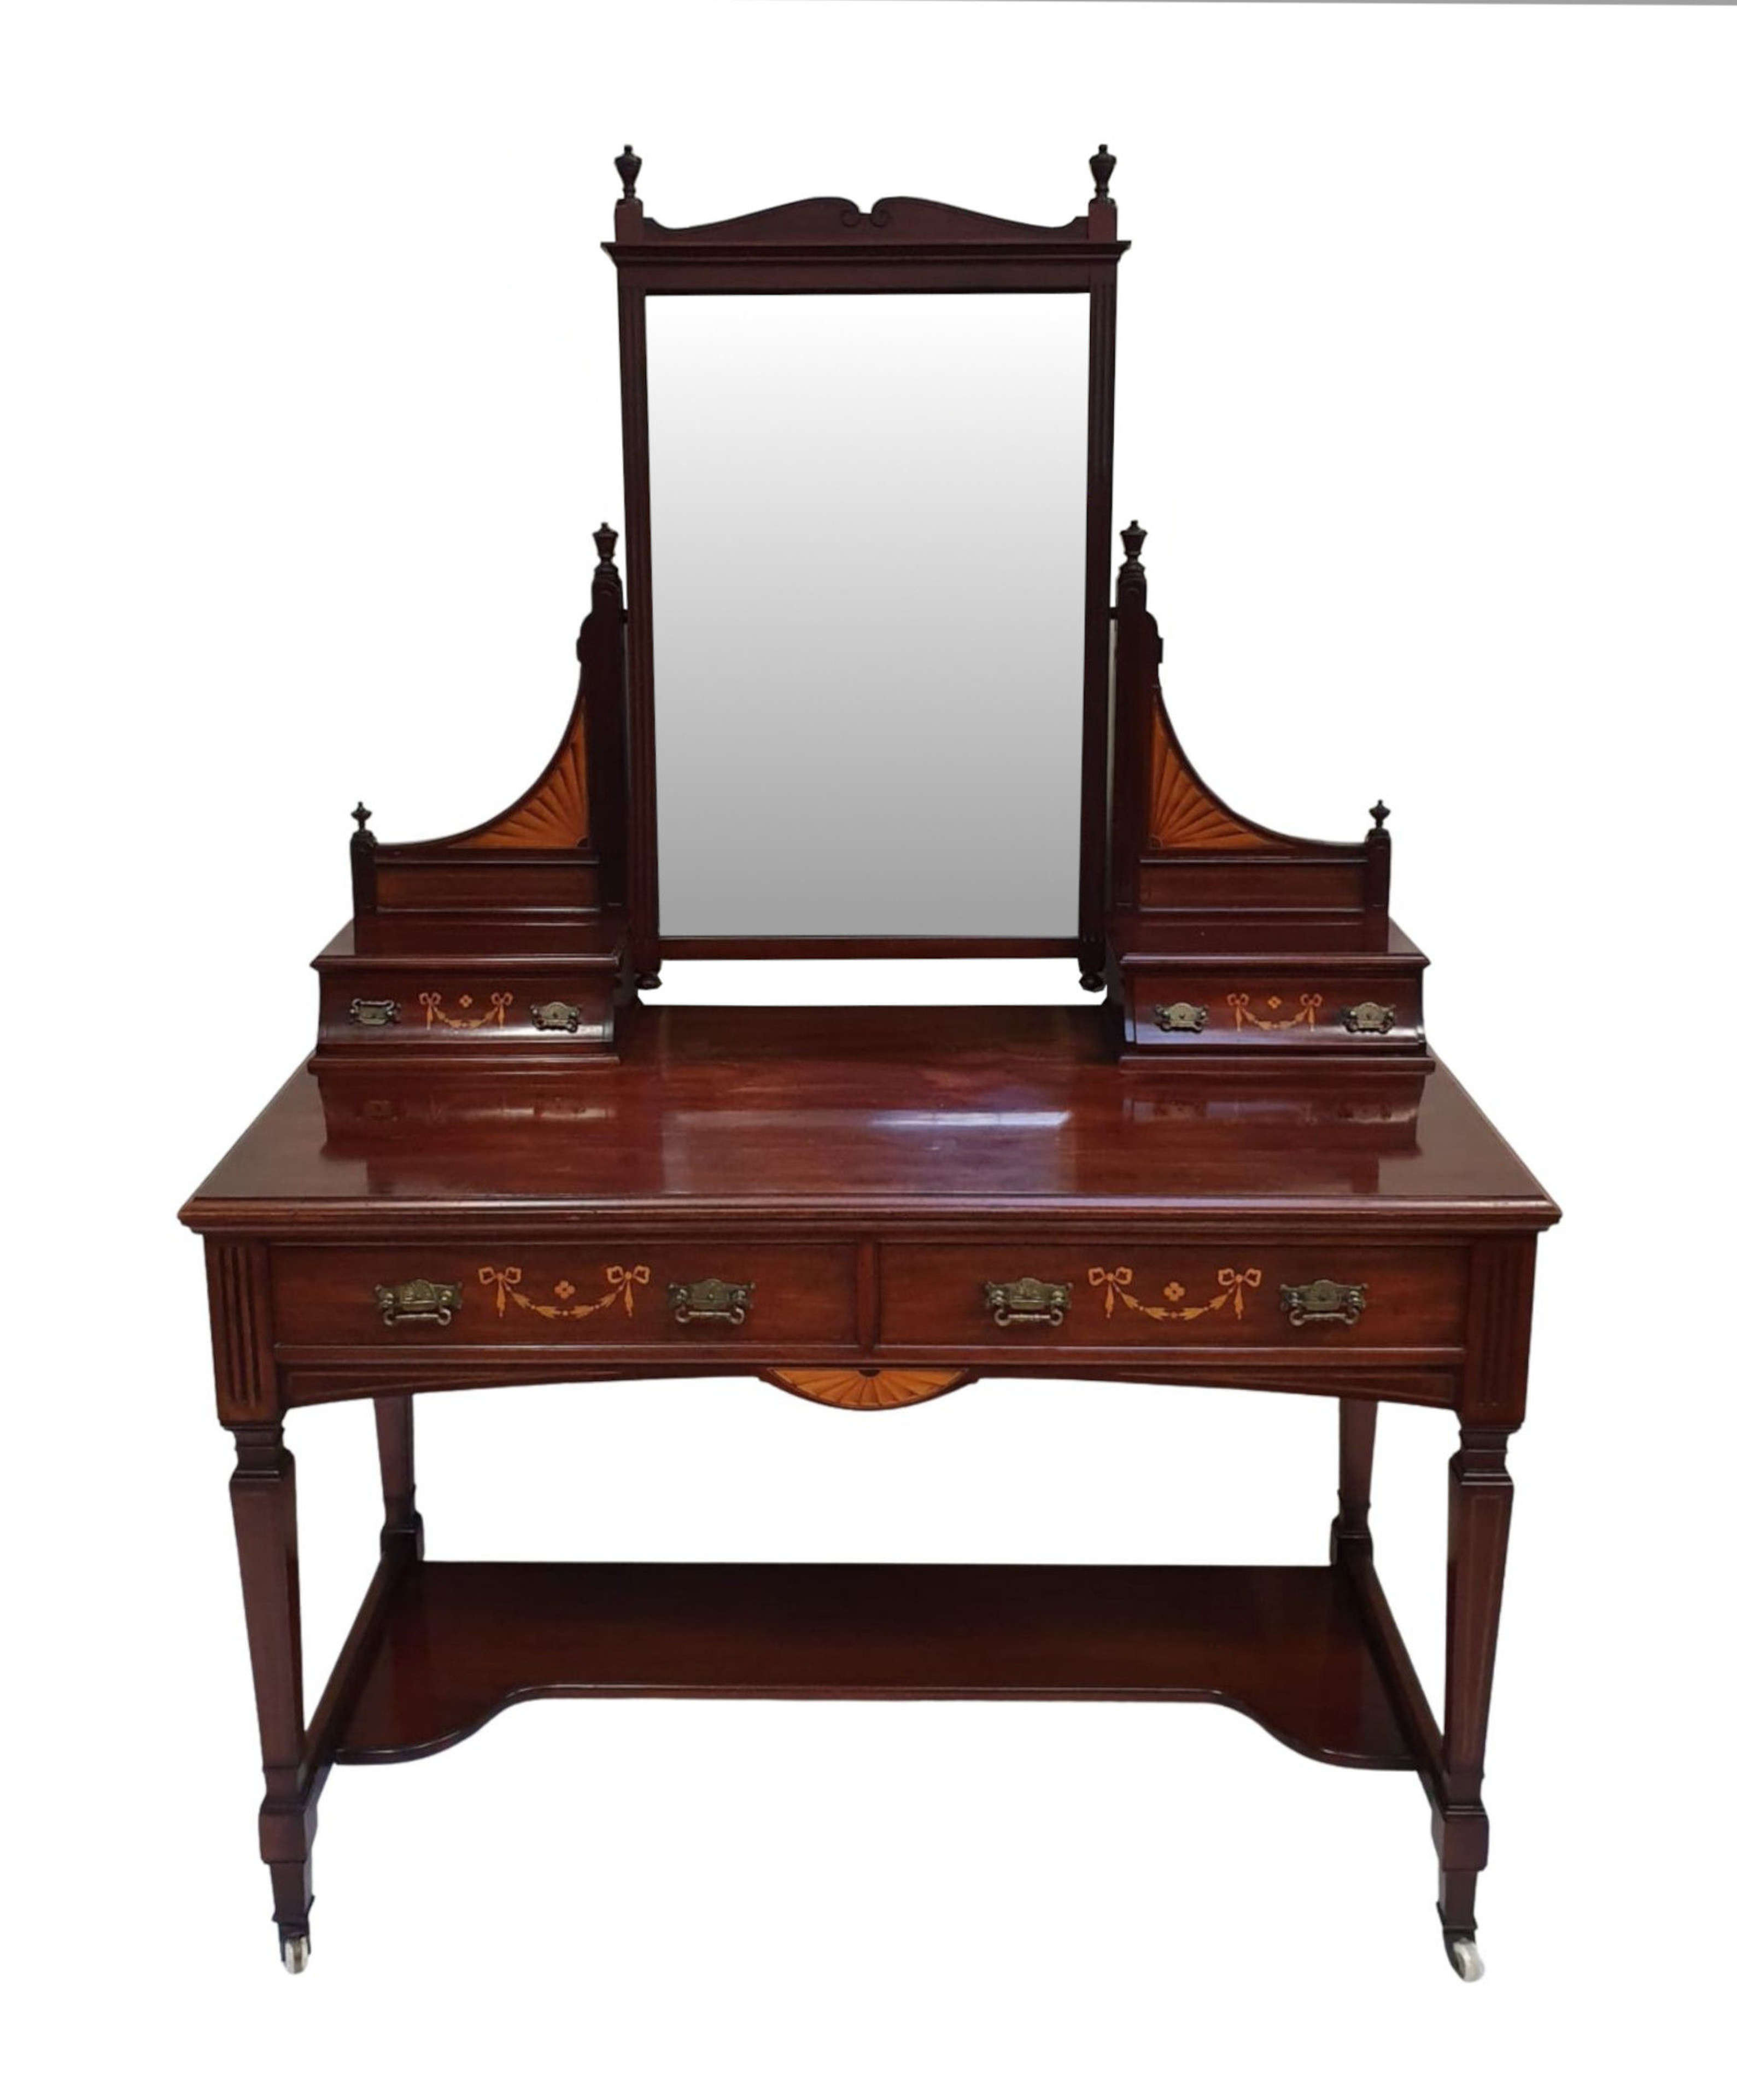 A Rare Edwardian Inlaid Dressing Table By Lamb of Manchester